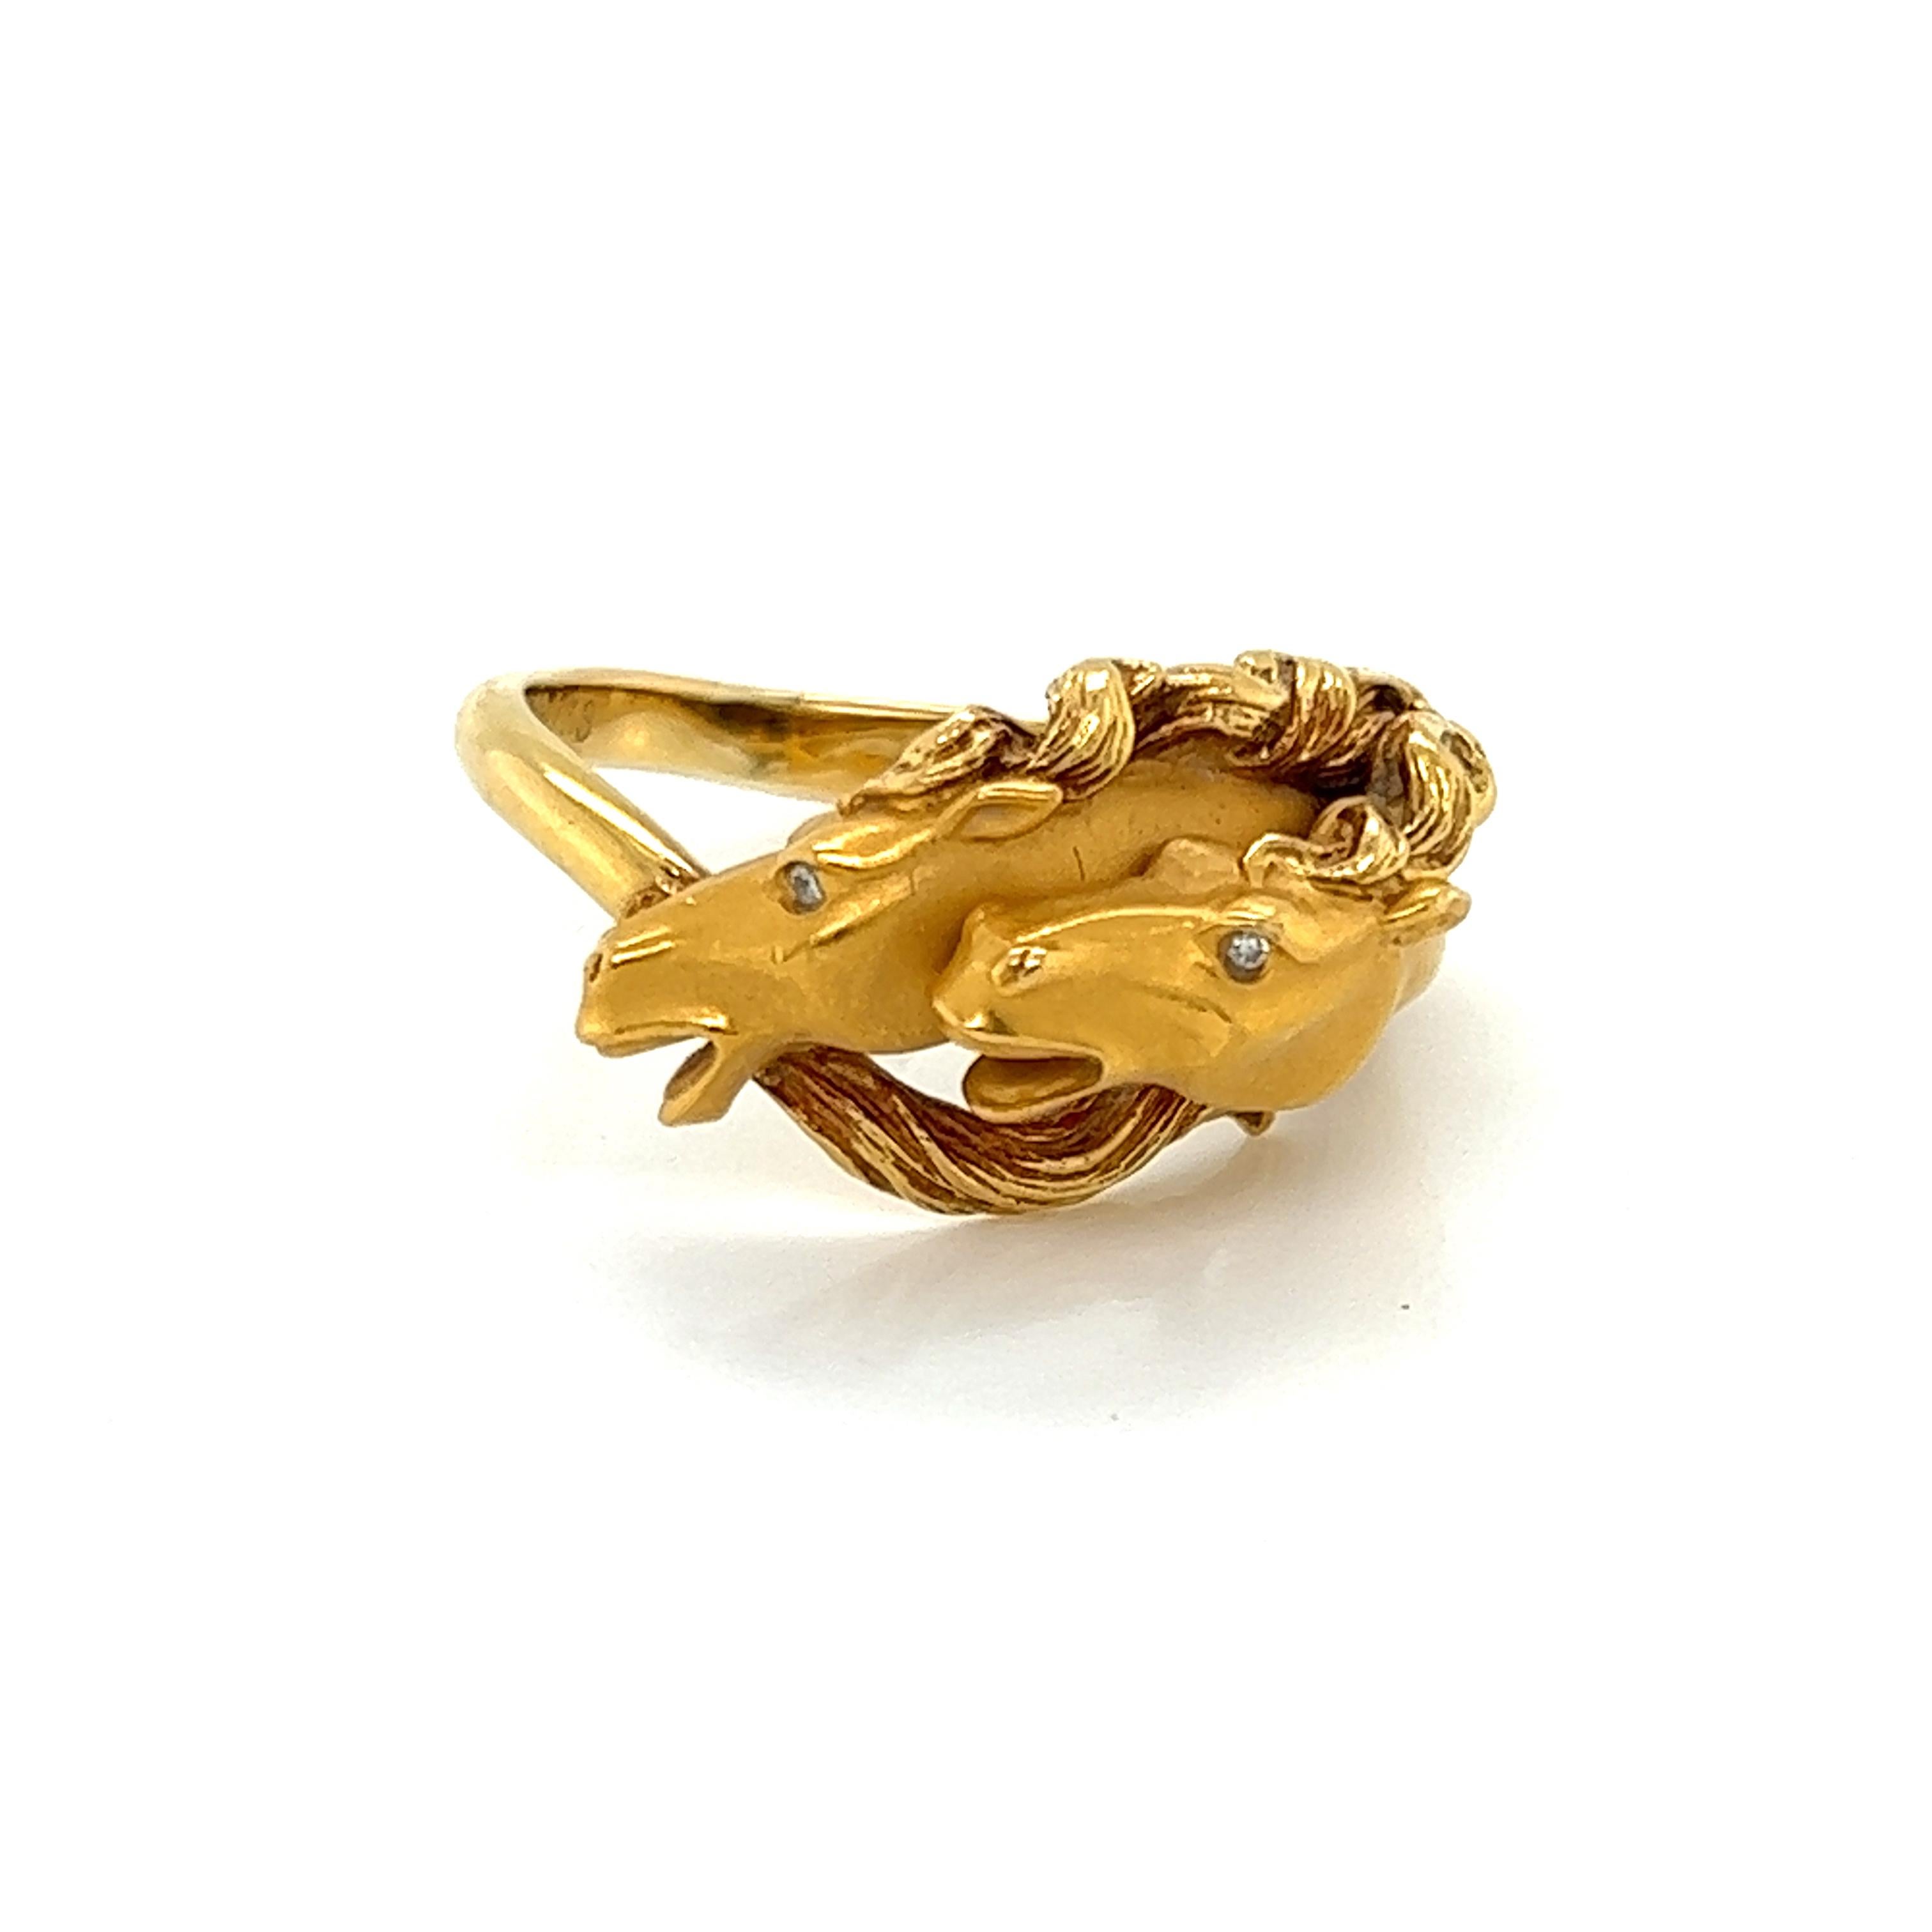 This authentic band ring is by Carrera y Carrera from the Horse Collection. It is crafted from 18k yellow gold with a smooth satin finish, it features 2 horses head in a playful pose, they have small round diamond as eyes and flowing mane. The neck